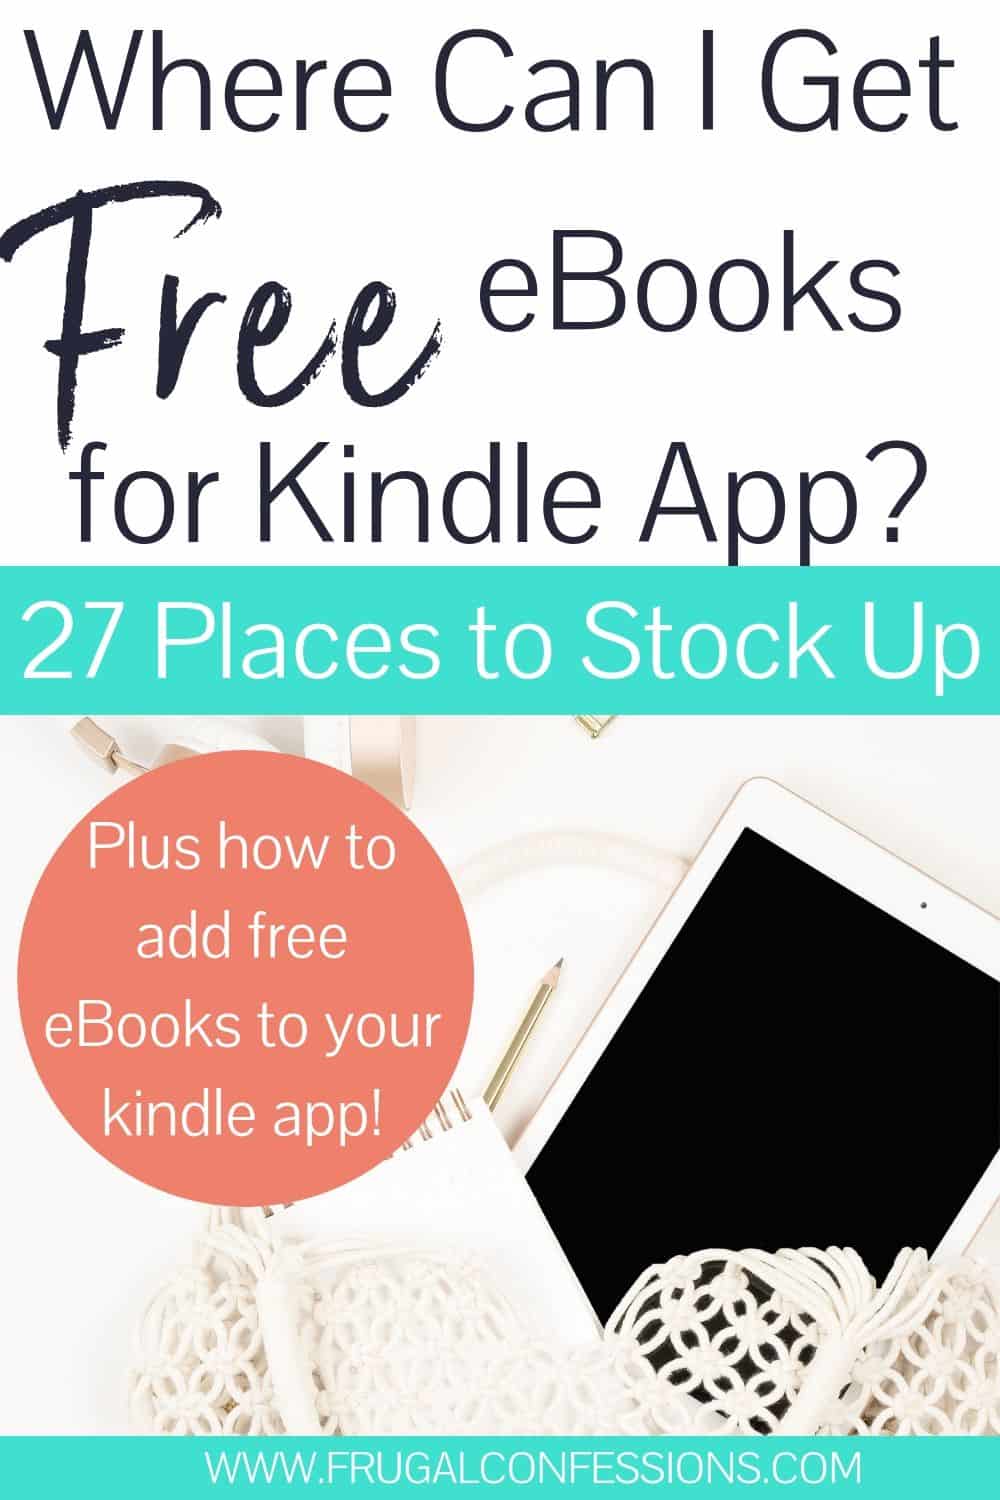 iPad on white background, text overlay "where can I get free ebooks for kindle app? 27 places to stock up"